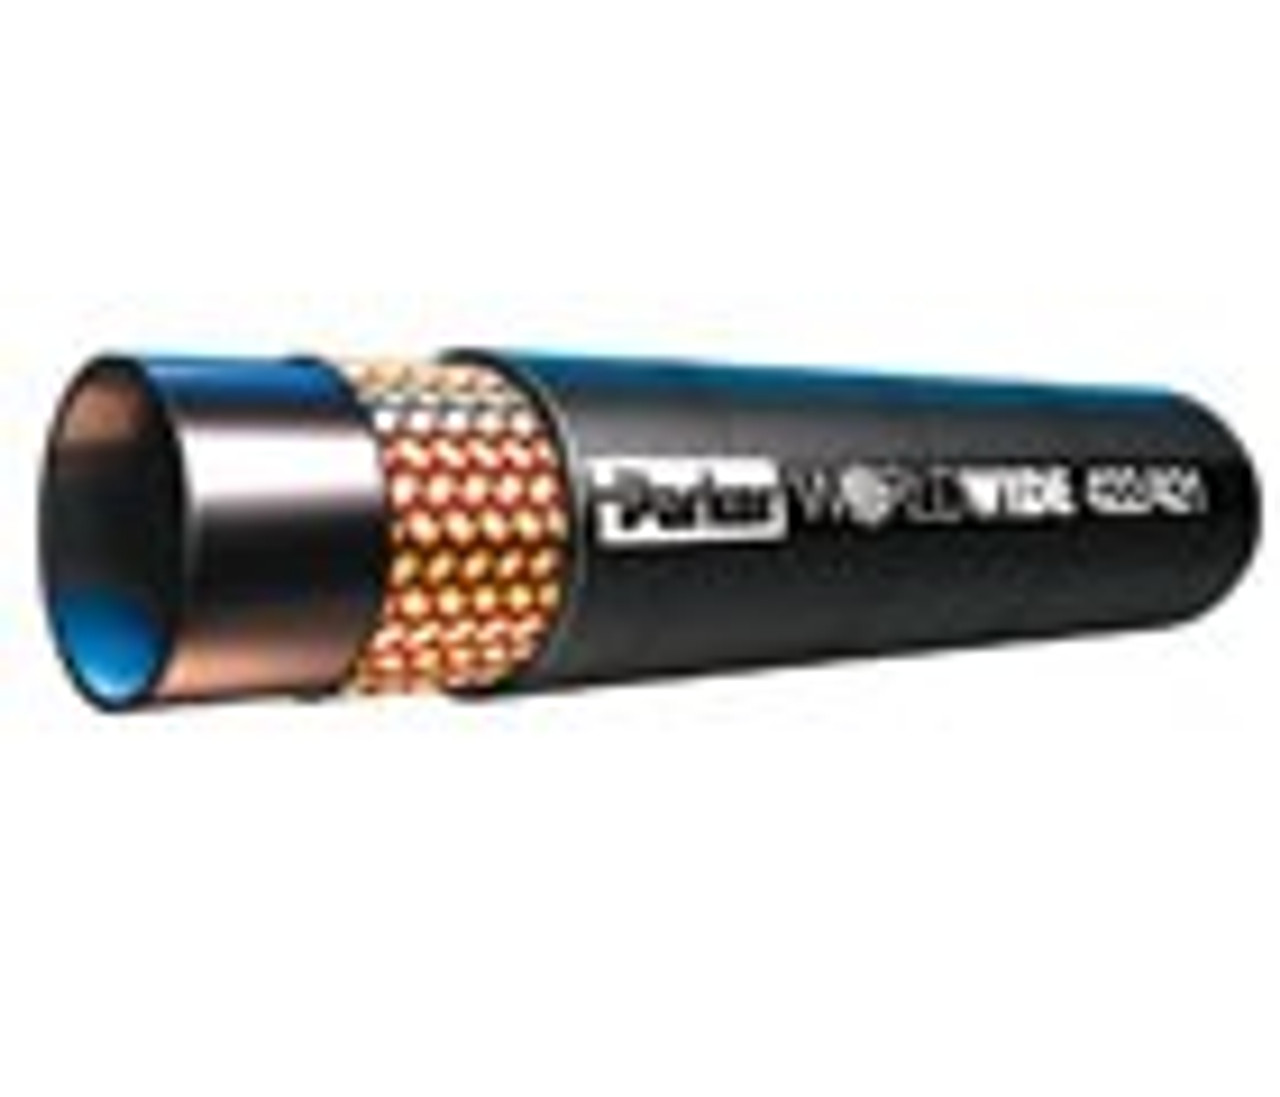 Parker 304-4 1/4" Id Hydraulic Hose For Phosphate Ester Fluids Hose Green Epdm Rubber Cover With Purple Layline 5000Psi (345Bar) 2 Wire Braids Temp Range Degrees F: (-40/+176)